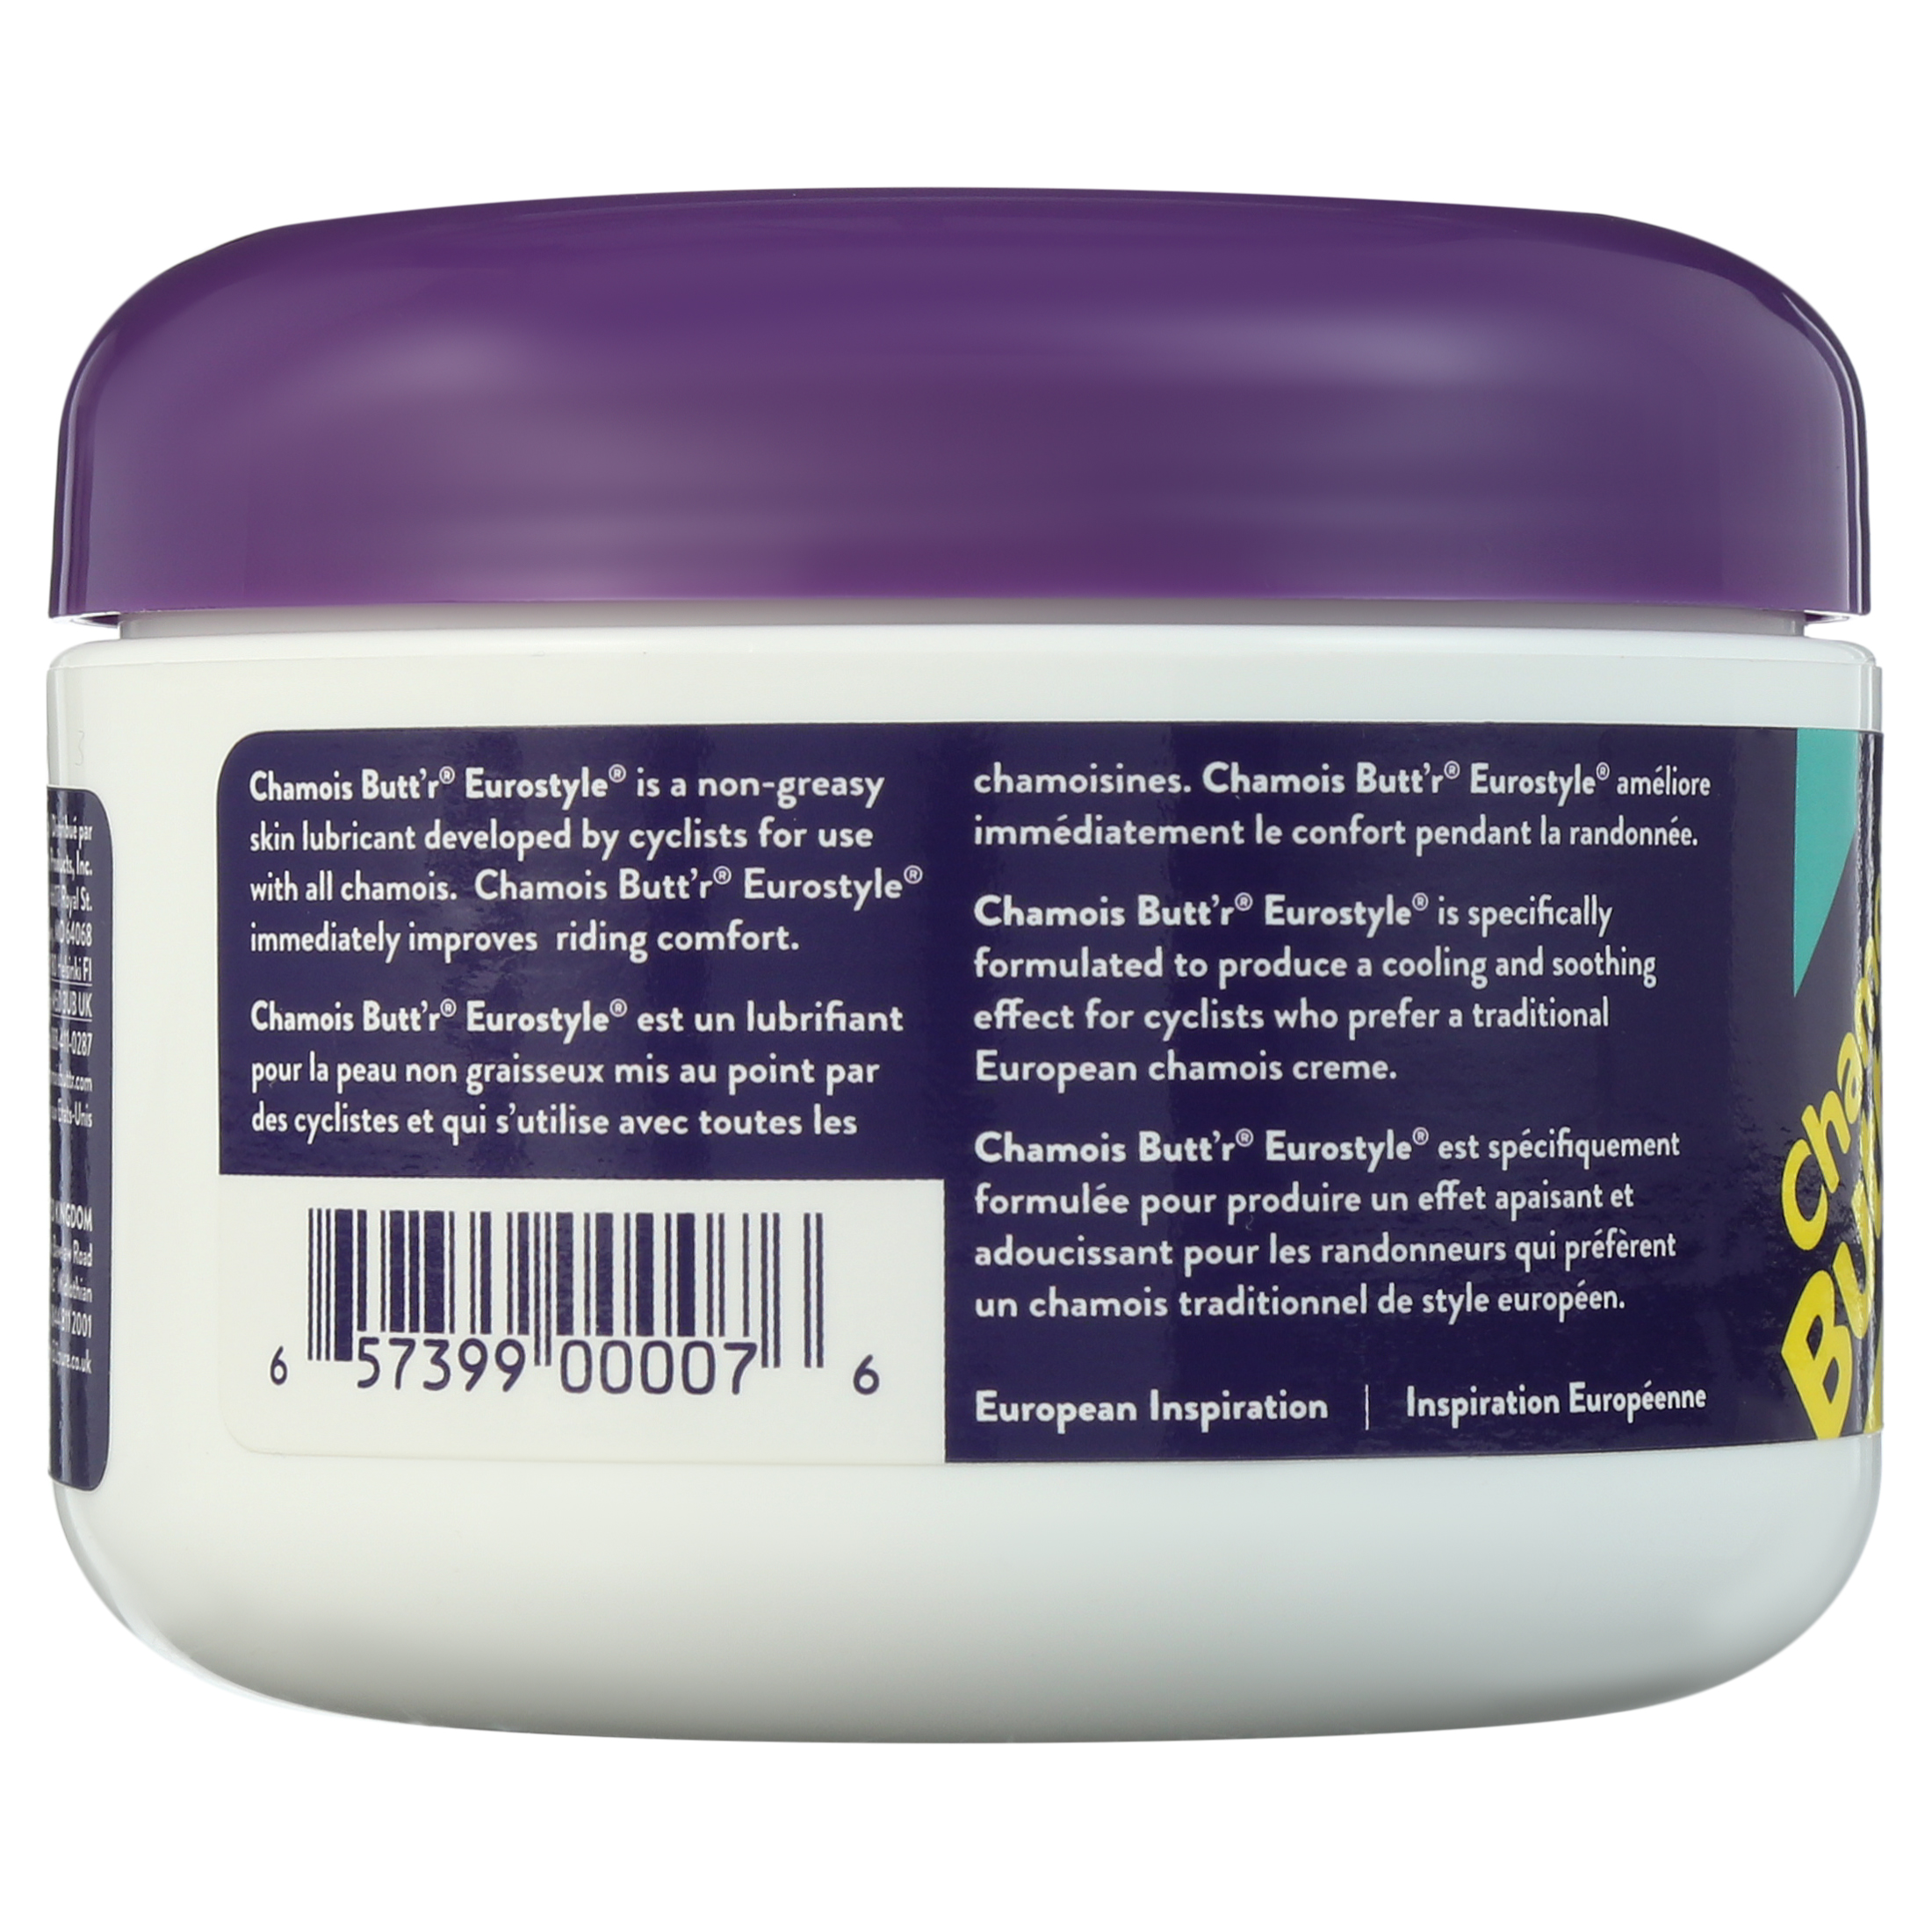 Chamois Buttr Eurostyle Anti Chafe Cream Non-Greasy Lubricant 8 Ounce Jar - image 4 of 7